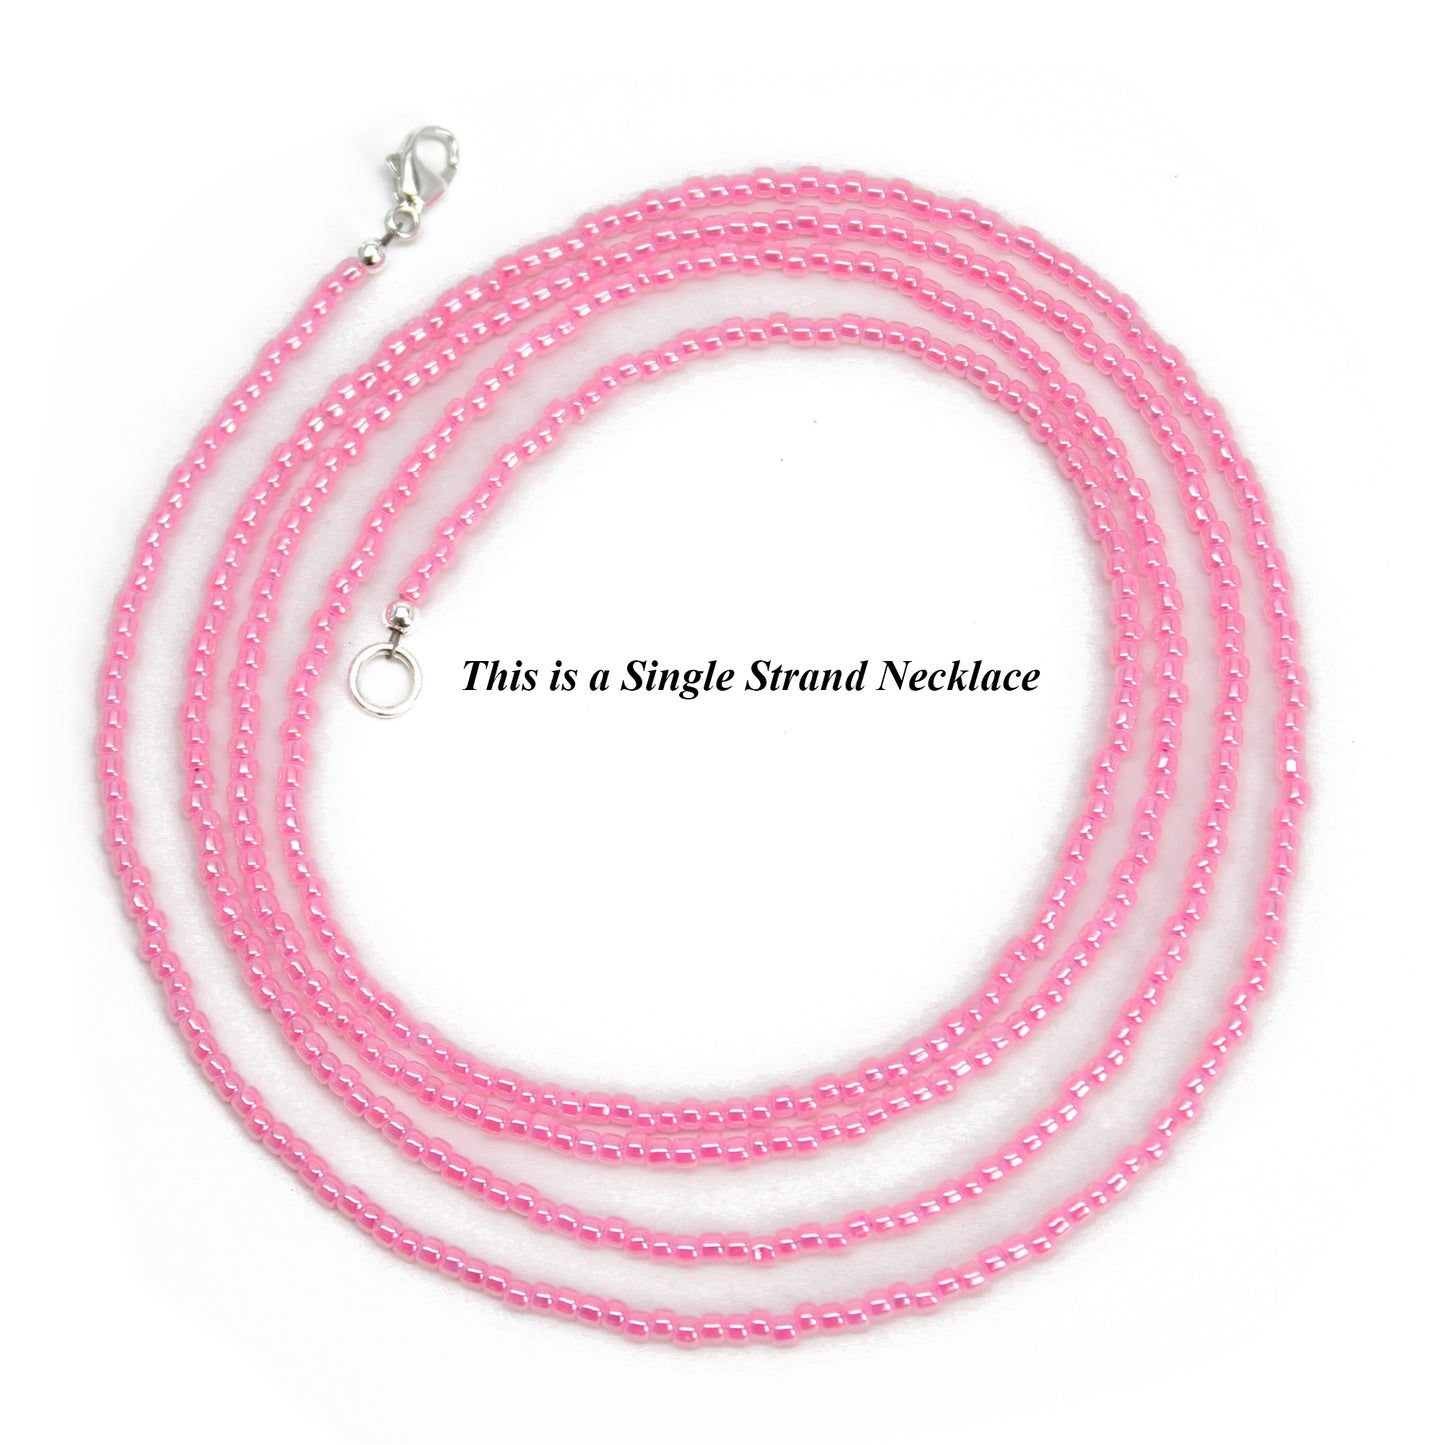 St. Bernadette Our Lady of Lourdes Rose Pendant Pink Seed Bead Necklac –  Christian Catholic Shop